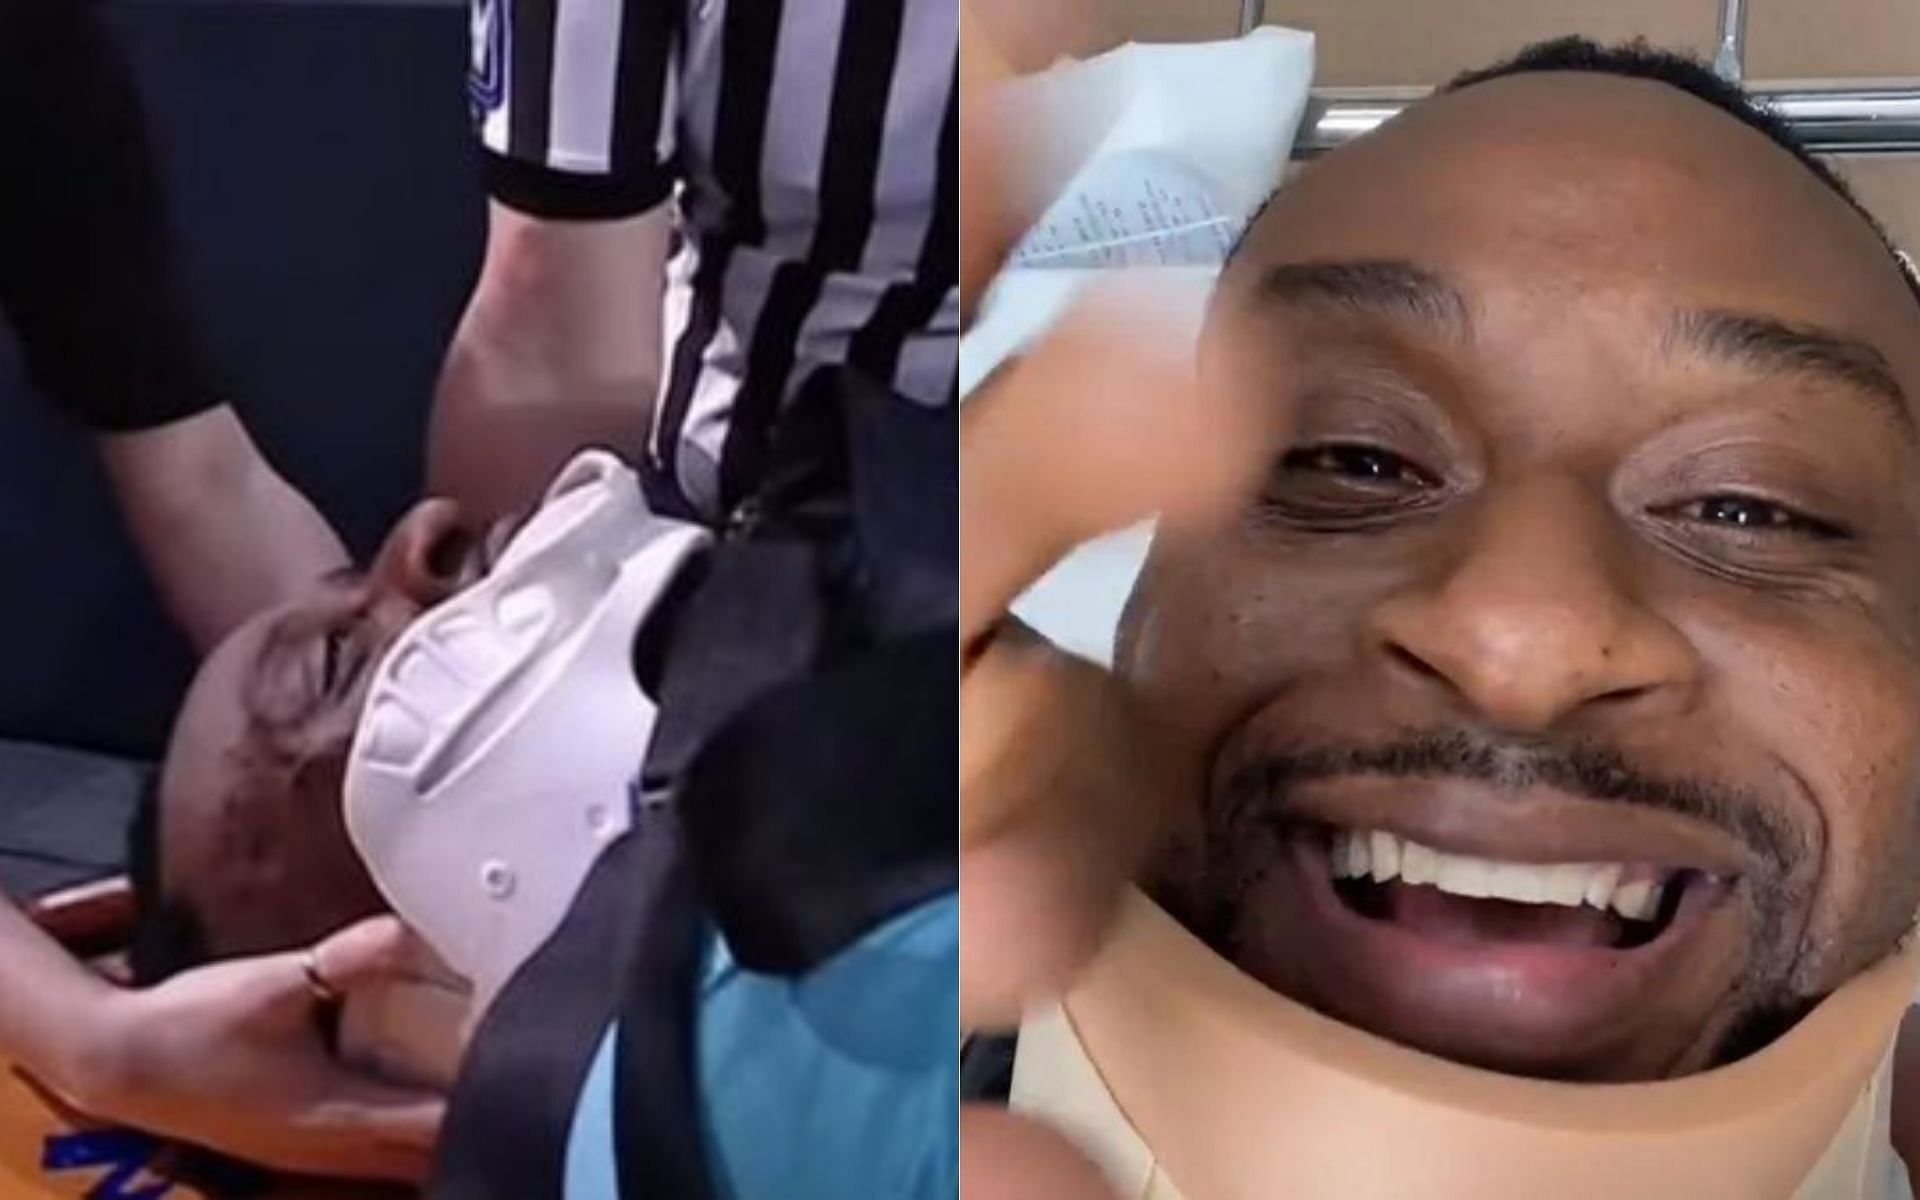 Big E suffered a potentially career-ending injury last week on WWE SmackDown during a match